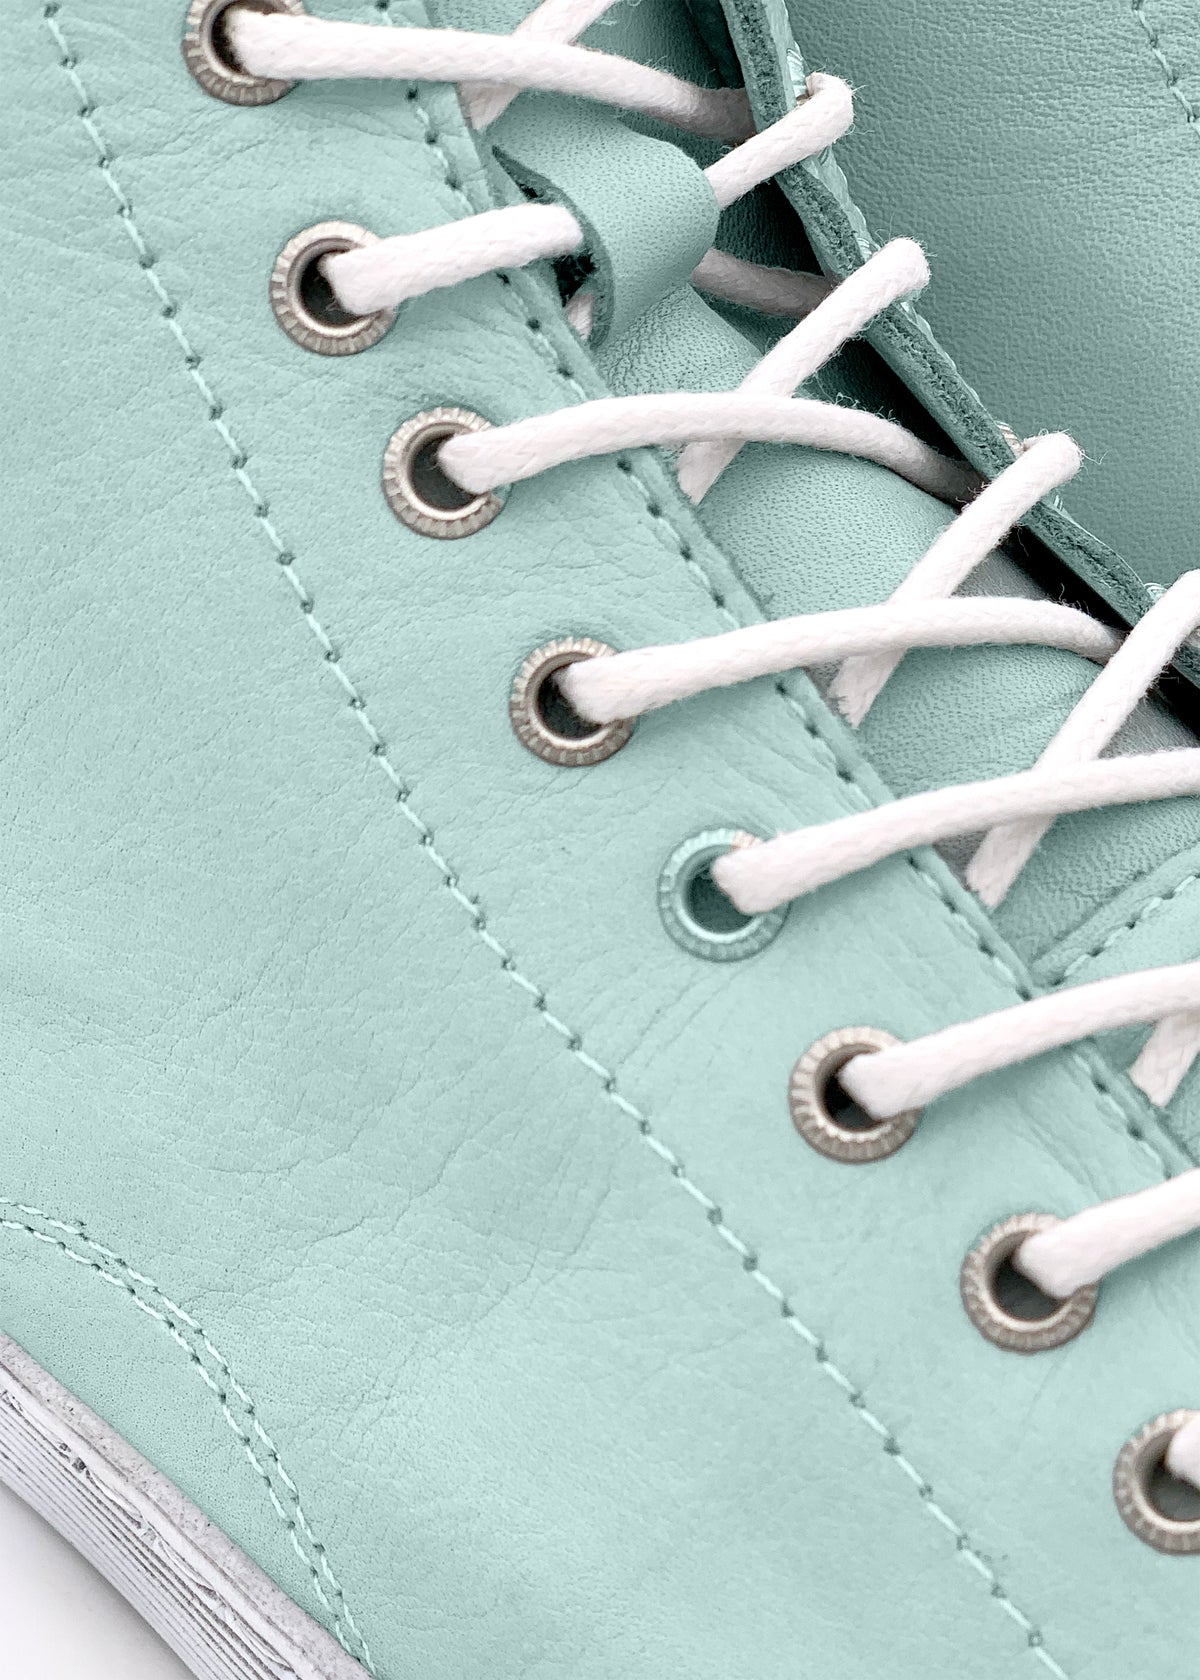 Sneakers with handles - mint green